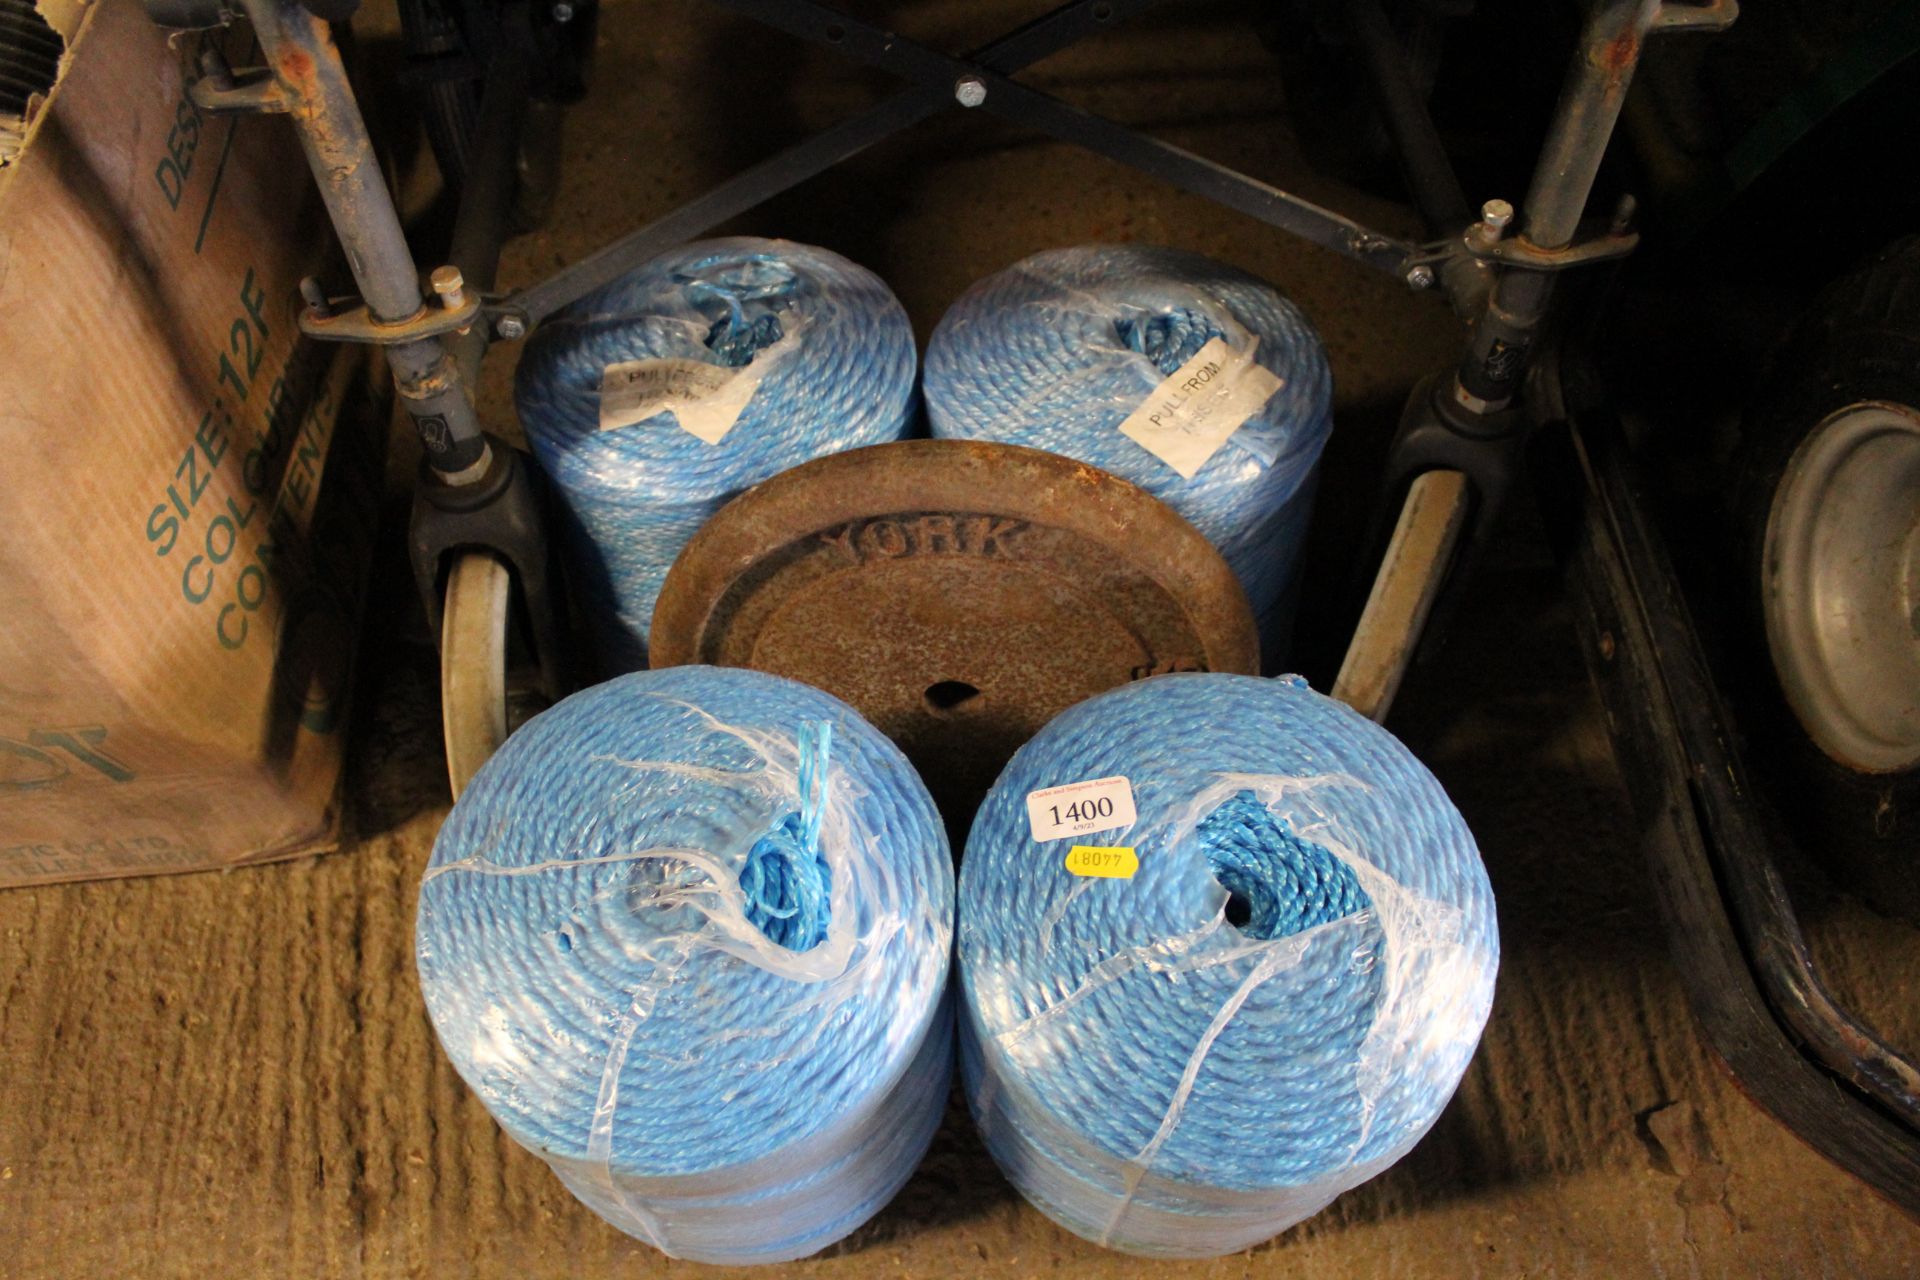 Four spools of blue rope and a Yorke Bar bell 10kg